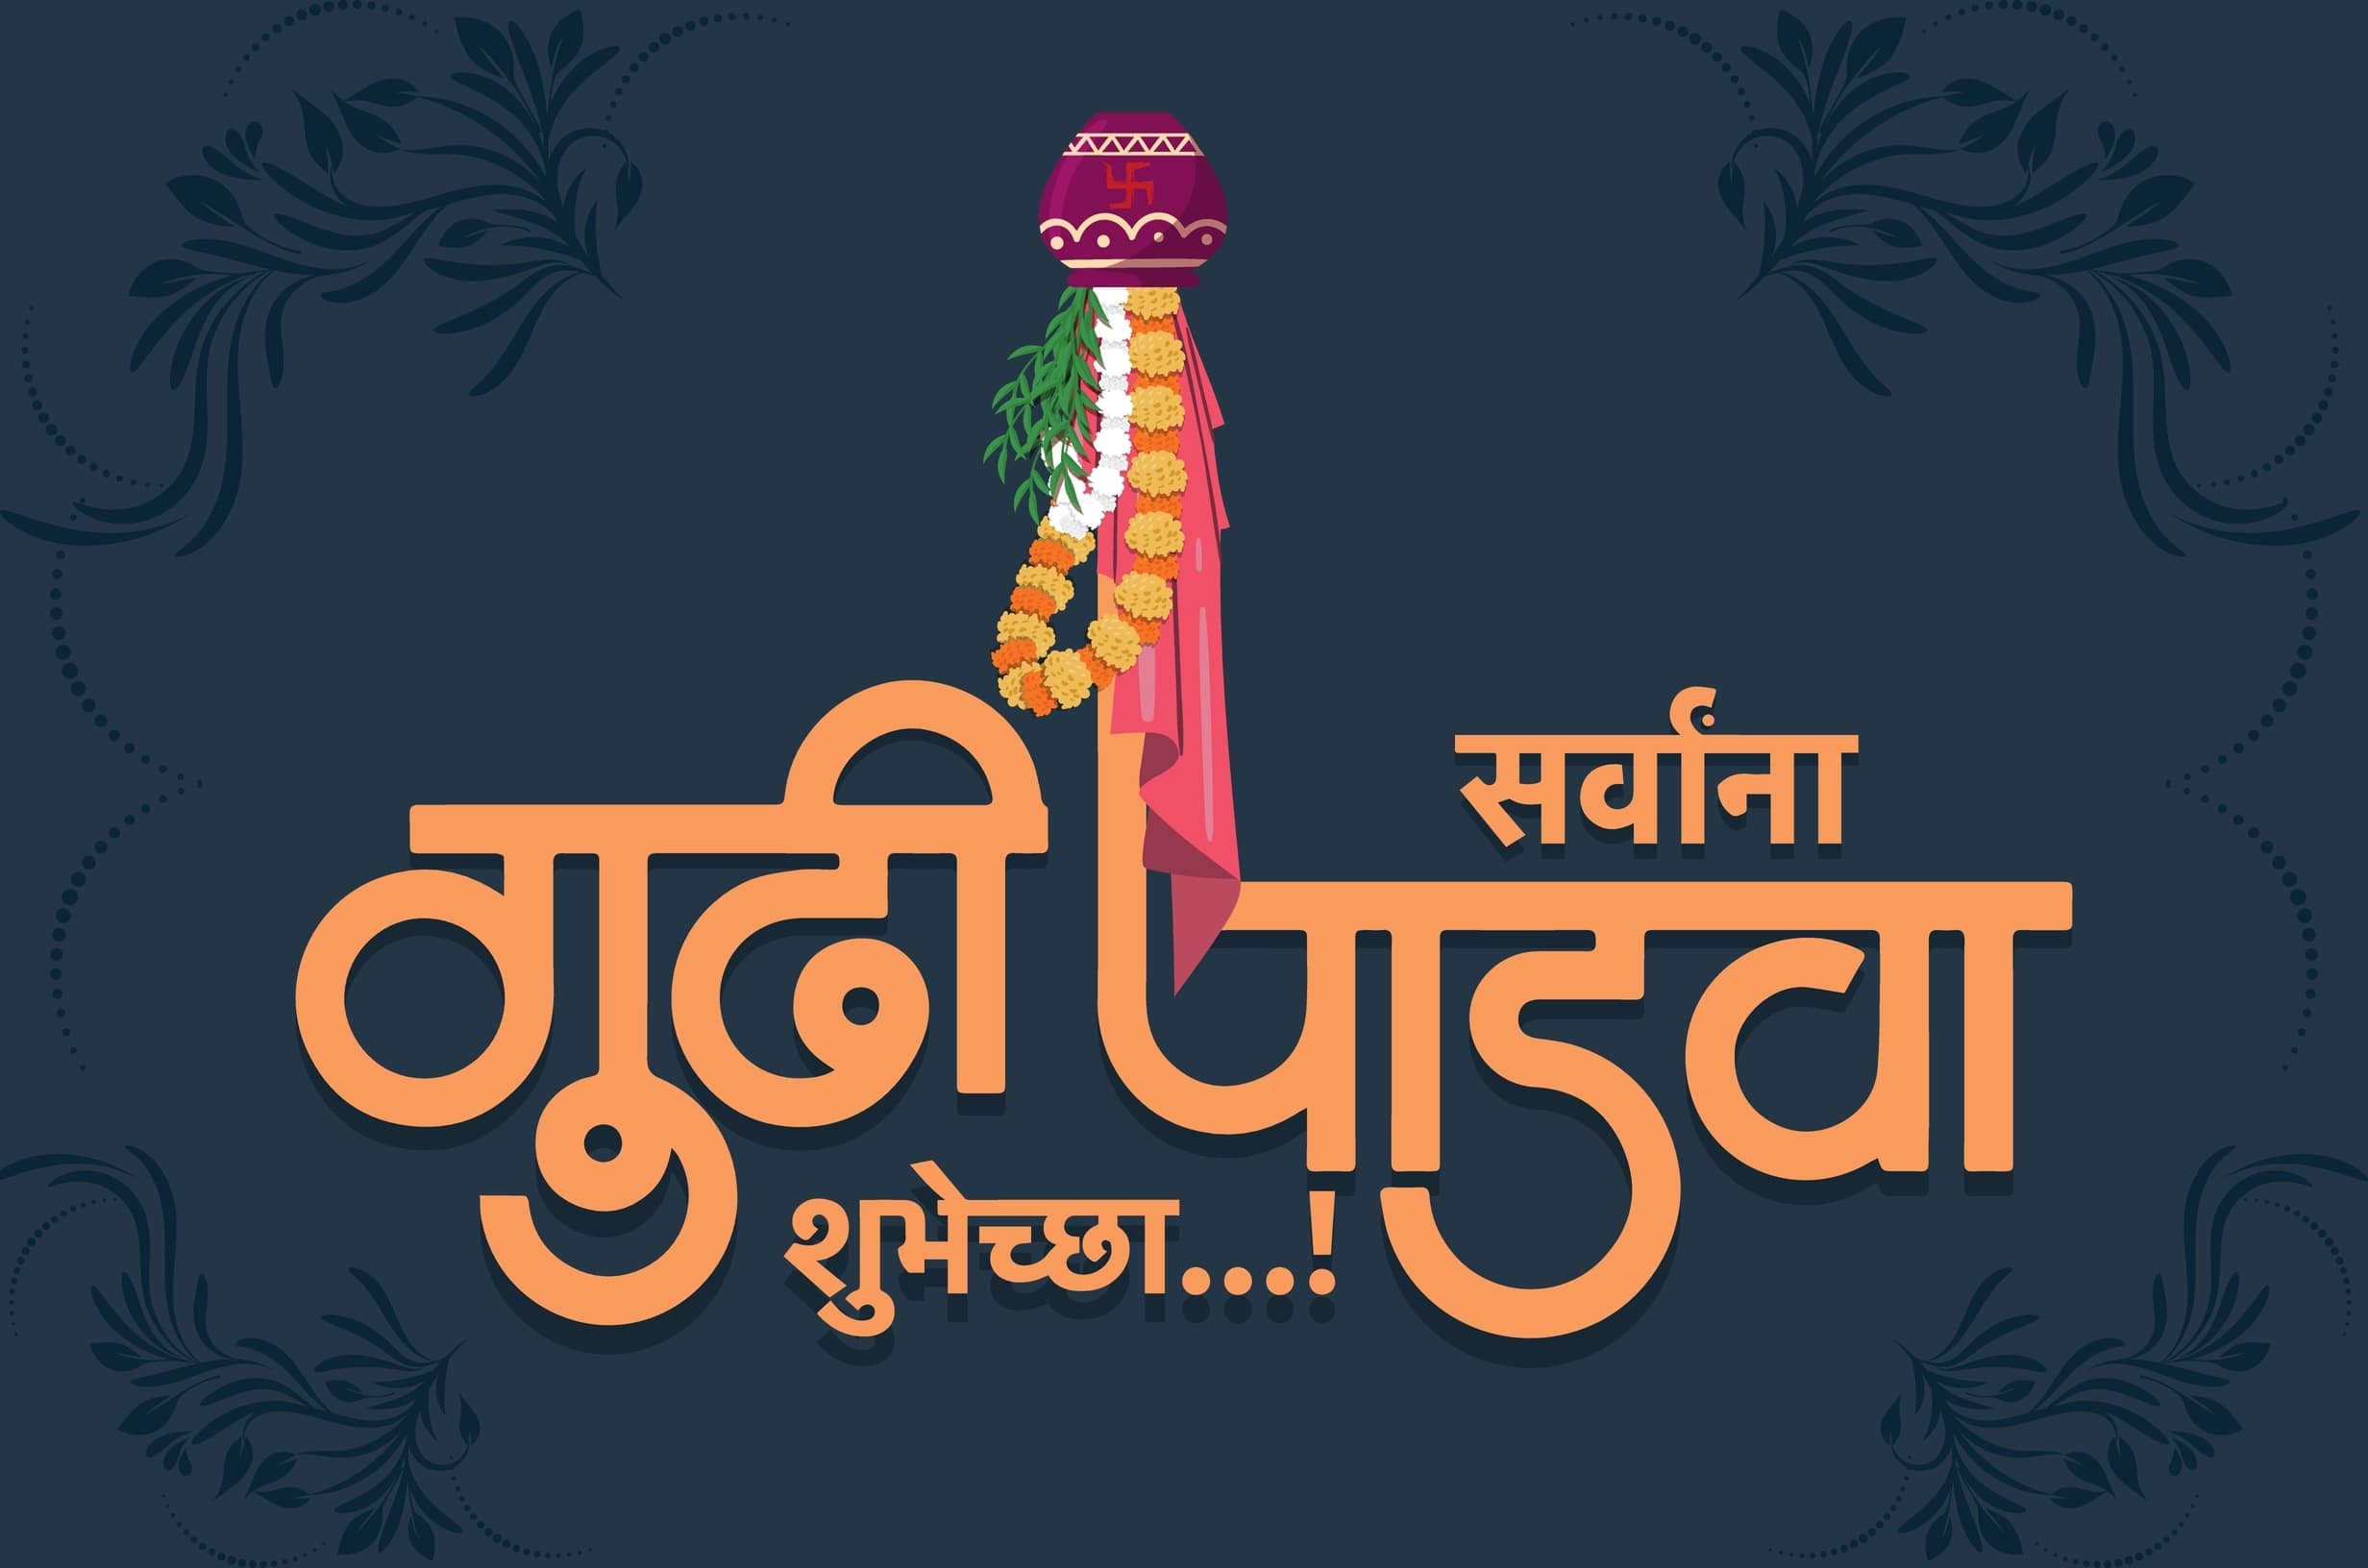 Happy Gudi Padwa 2023 Wishes, Images, Quotes, Messages and WhatsApp